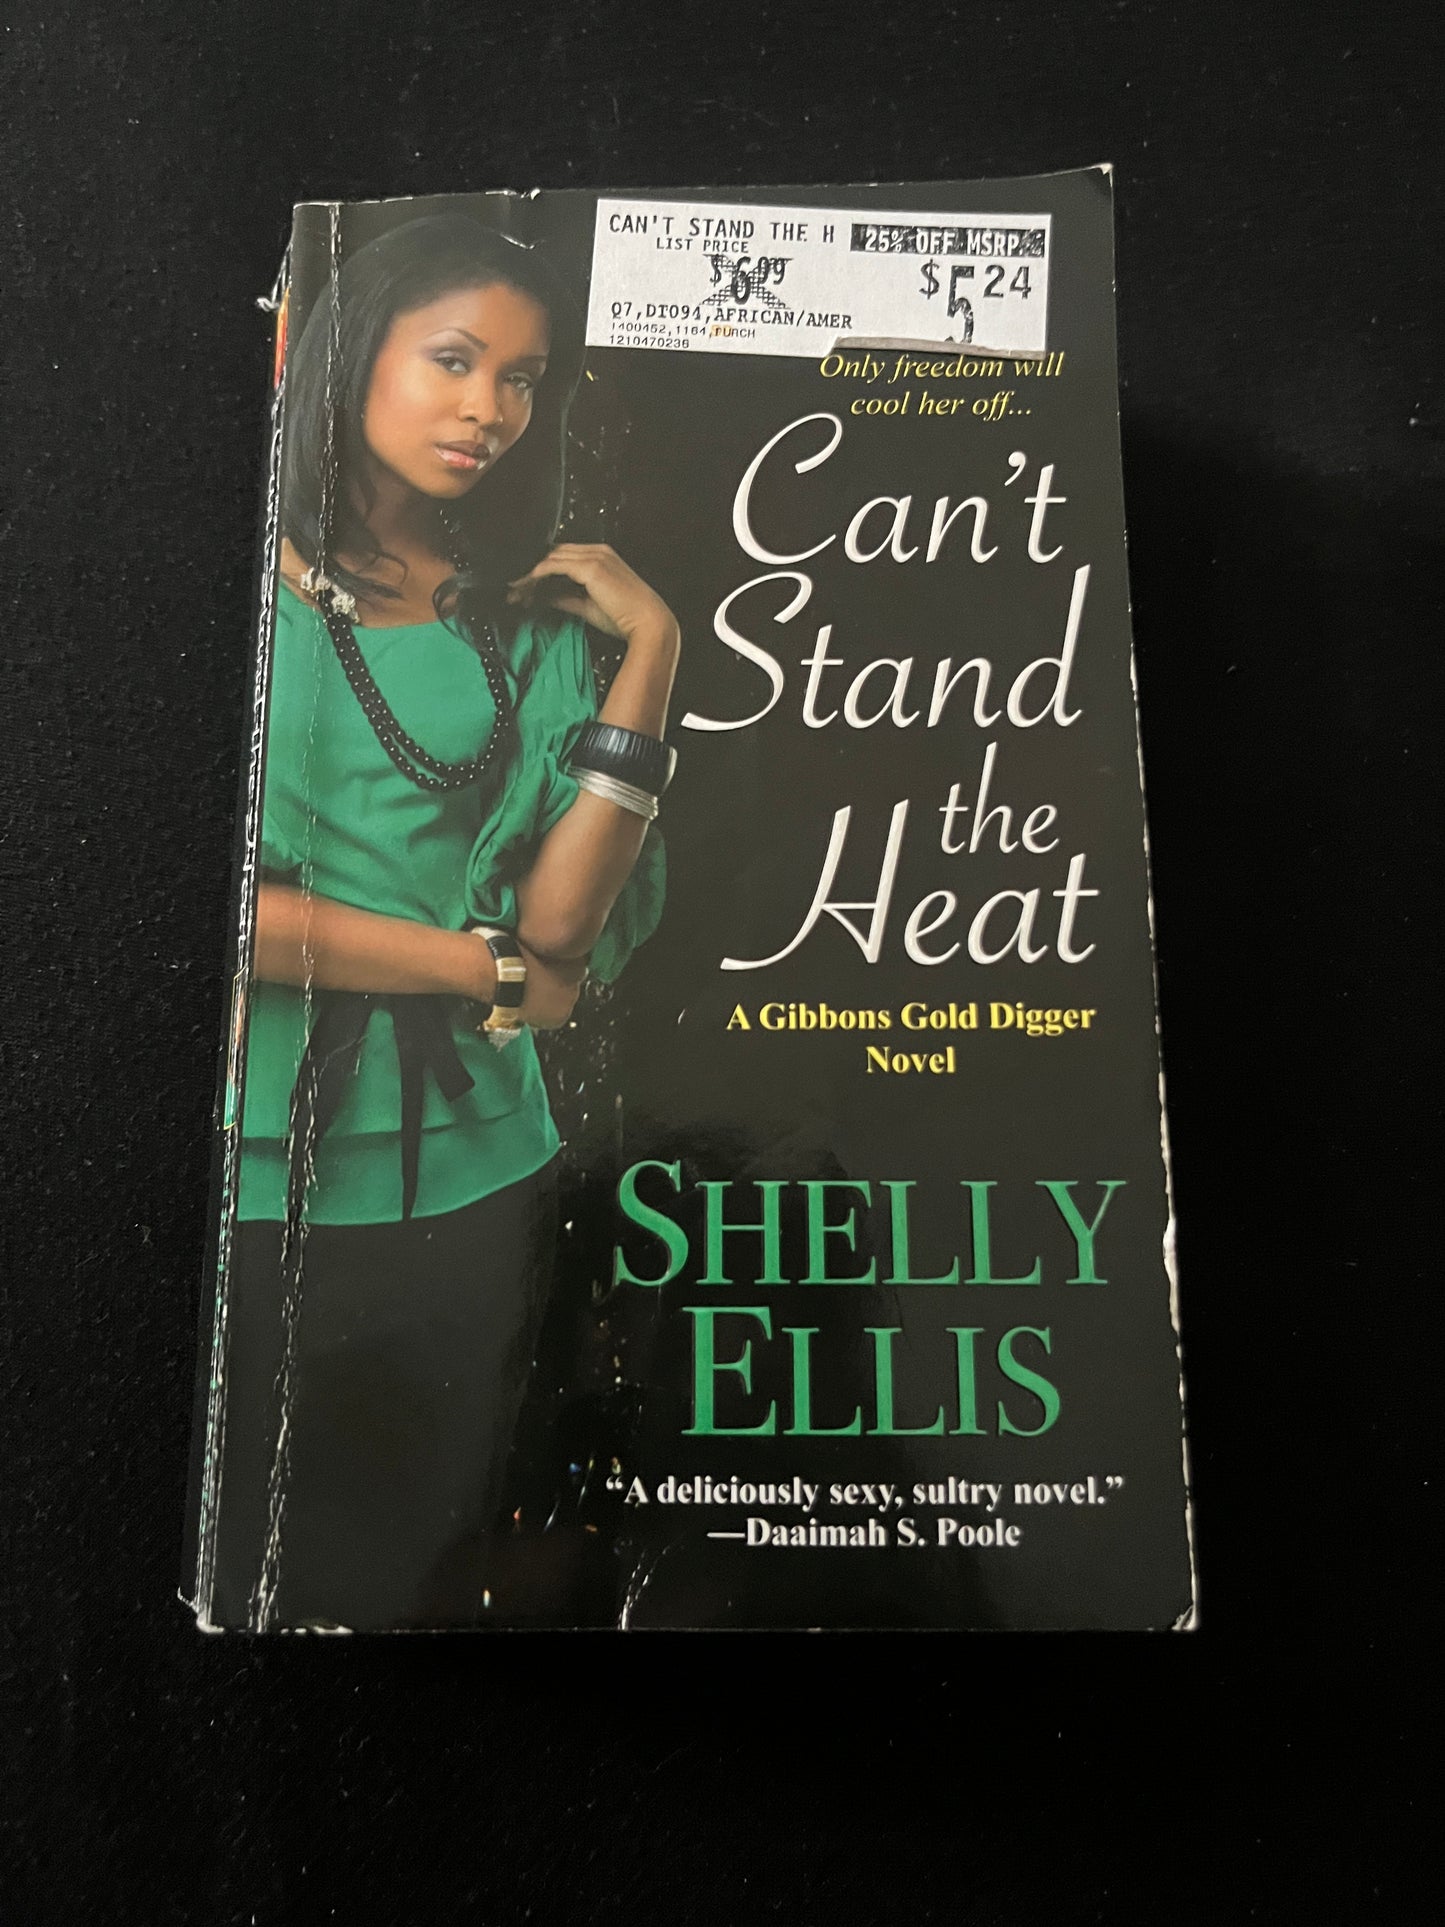 CAN'T STAND THE HEAT by Shelly Ellis